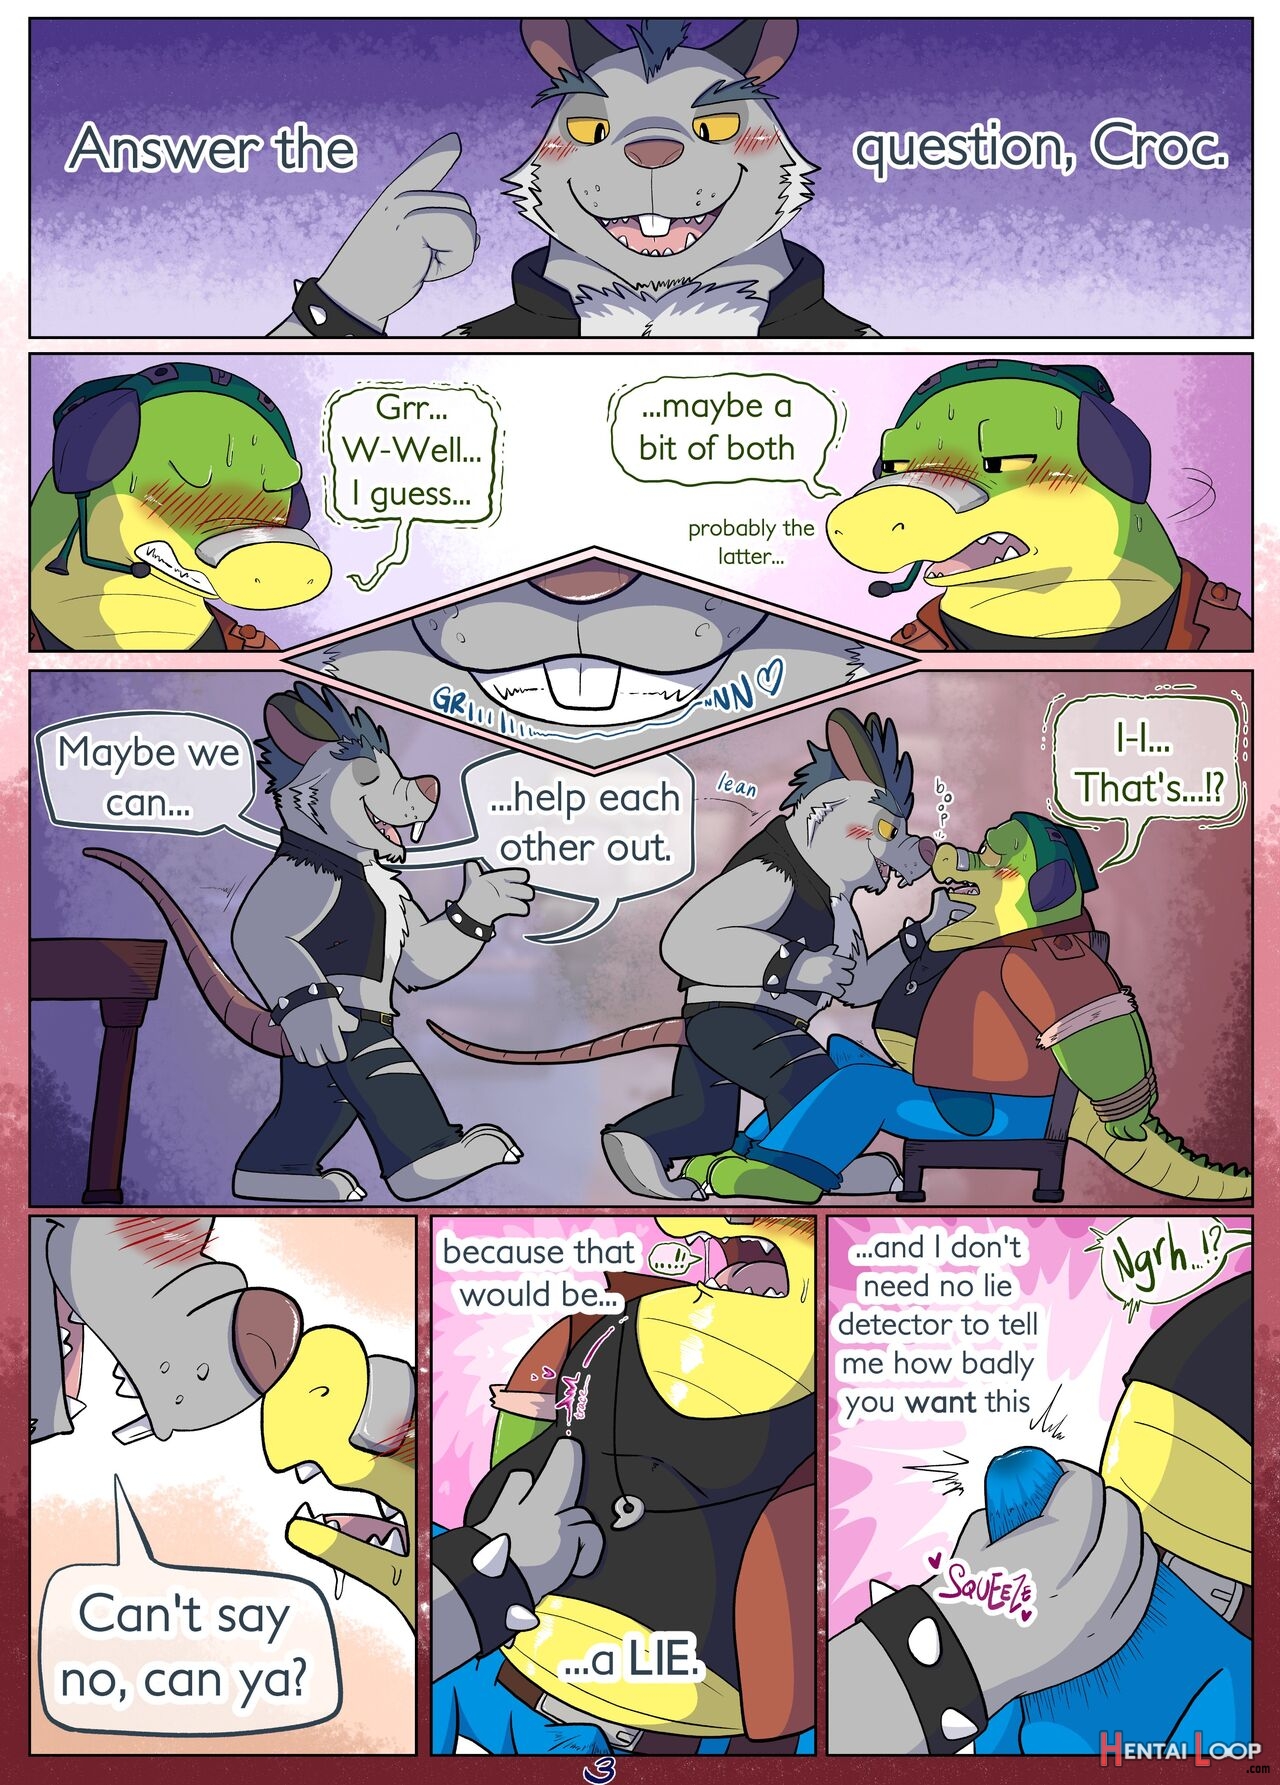 The Twelfth Ending page 4